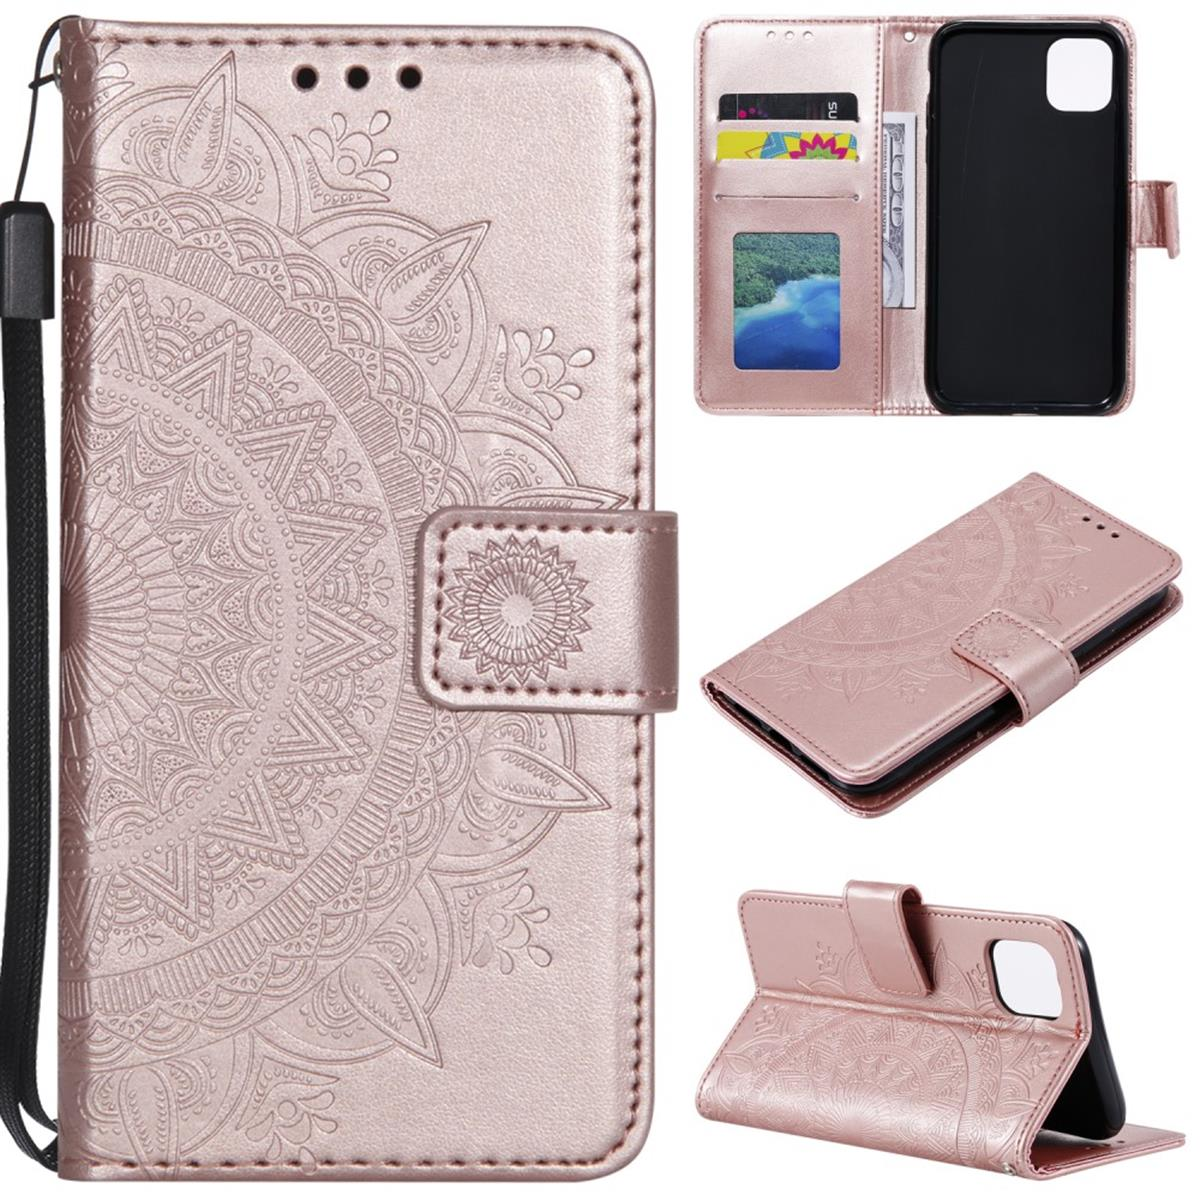 COVERKINGZ Klapphülle Samsung, Muster, Galaxy 5G, A22 mit Bookcover, Mandala Roségold